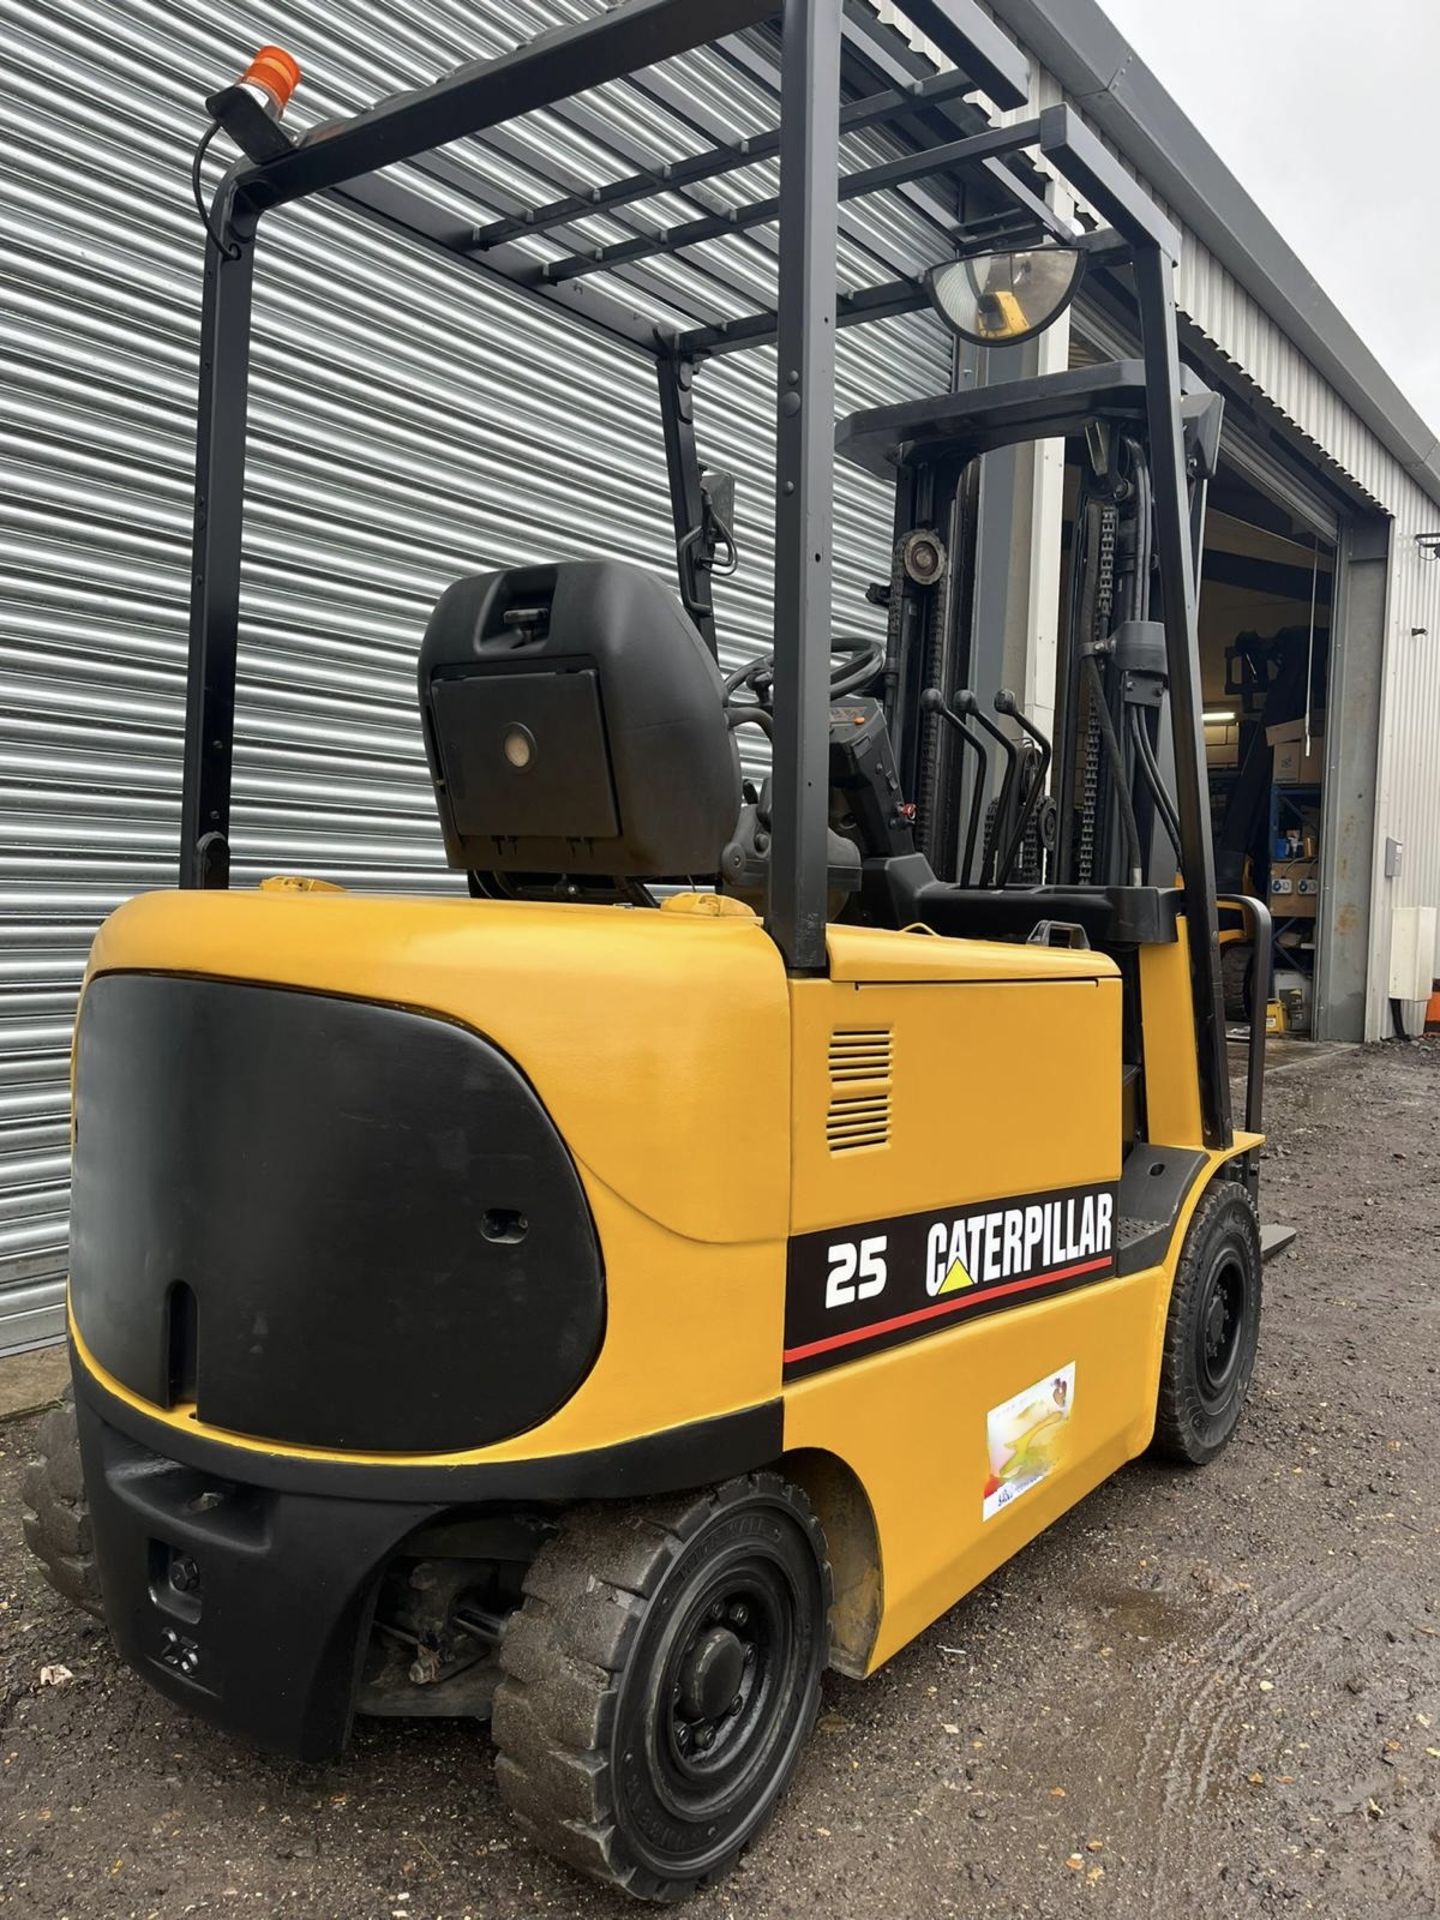 2014 - CATERPILLAR, EP25, 2.5 Tonne Electric Forklift - Image 2 of 7